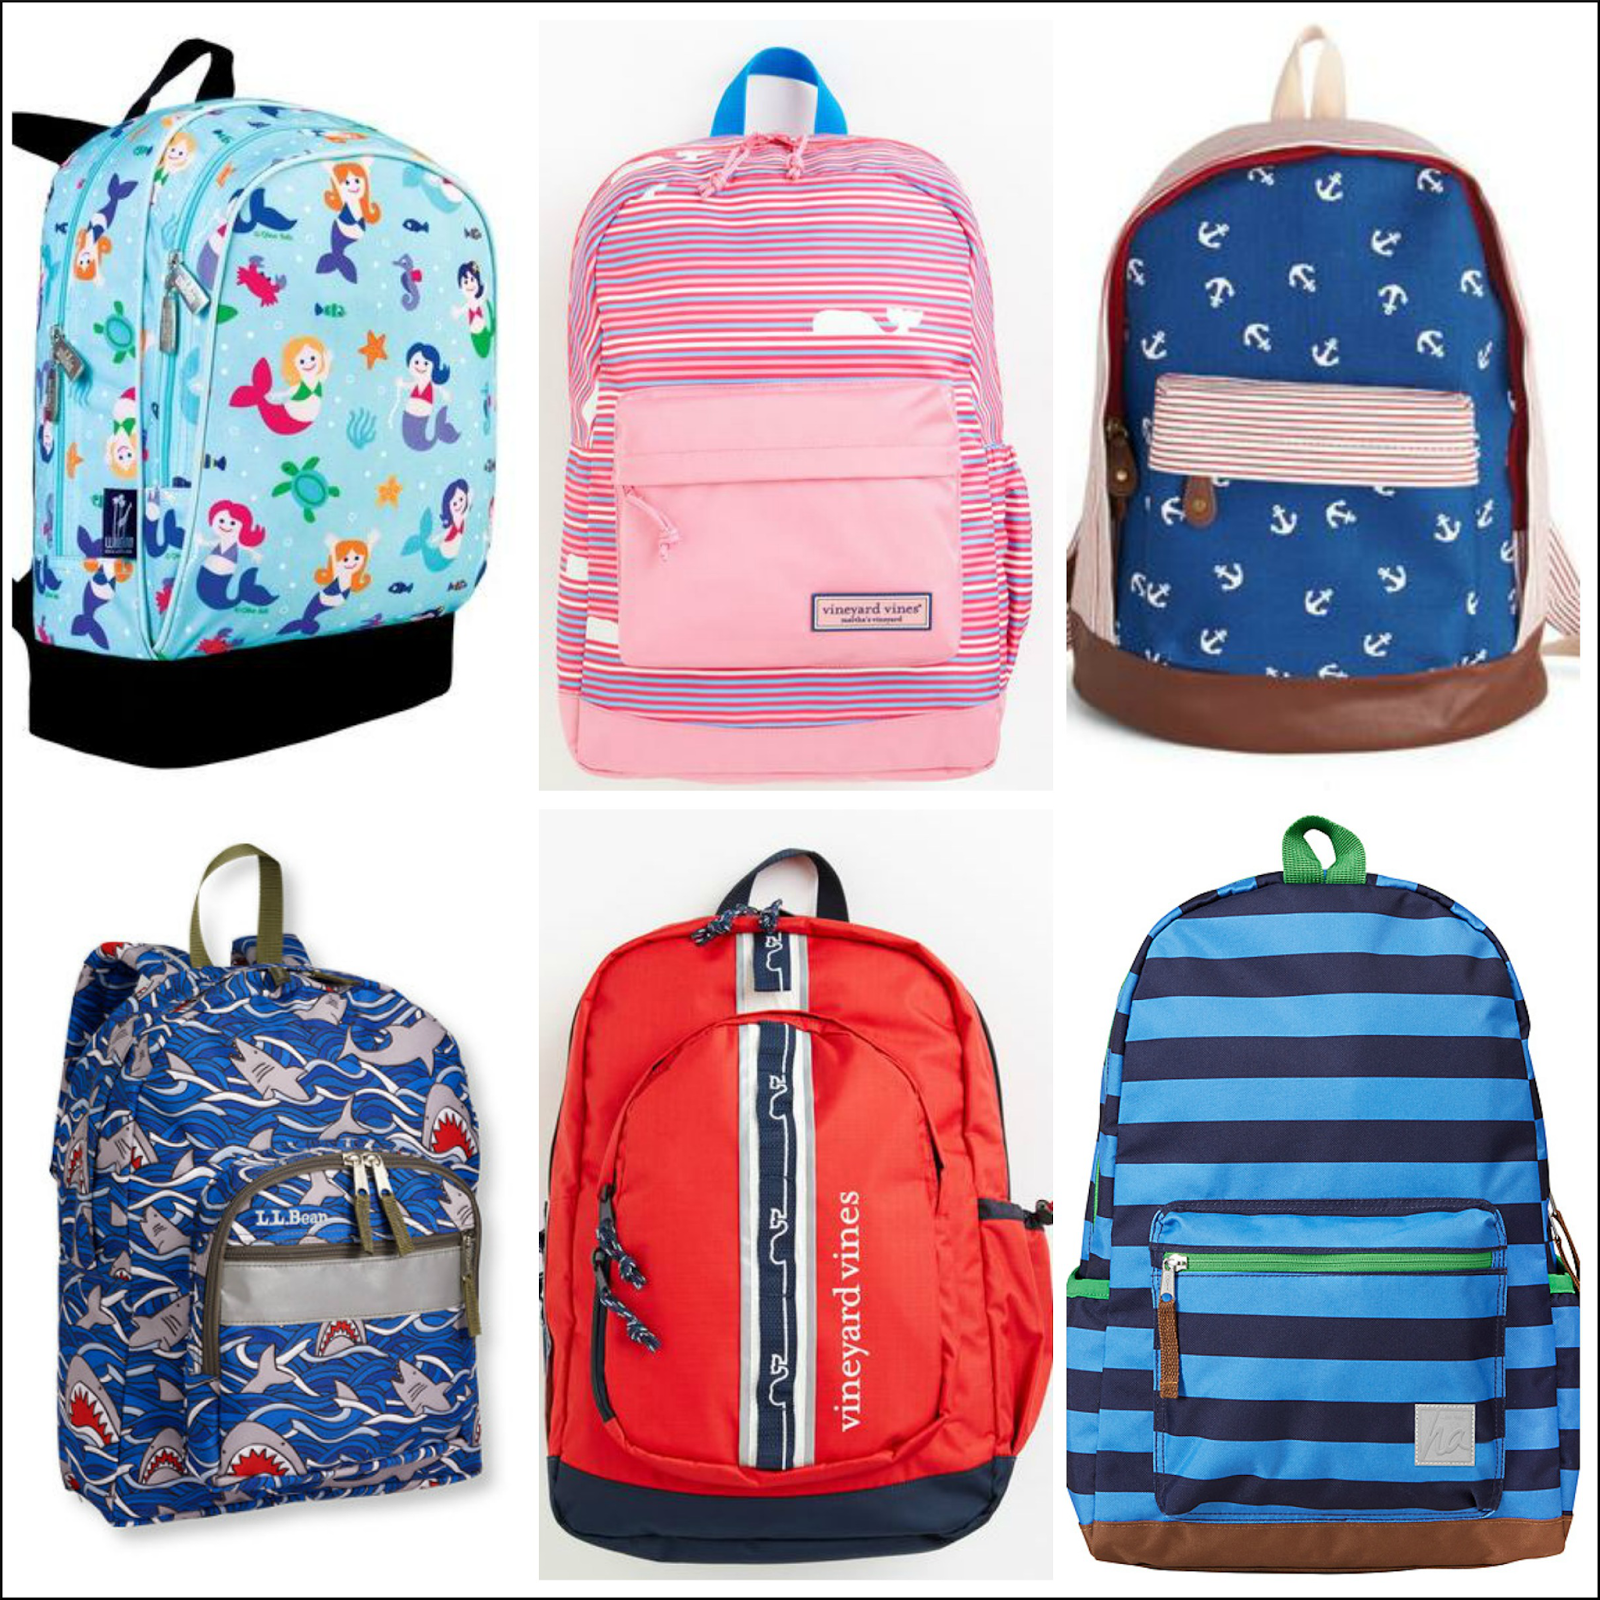 Nautical by Nature: Back to School: Nautical Backpacks and Accessories